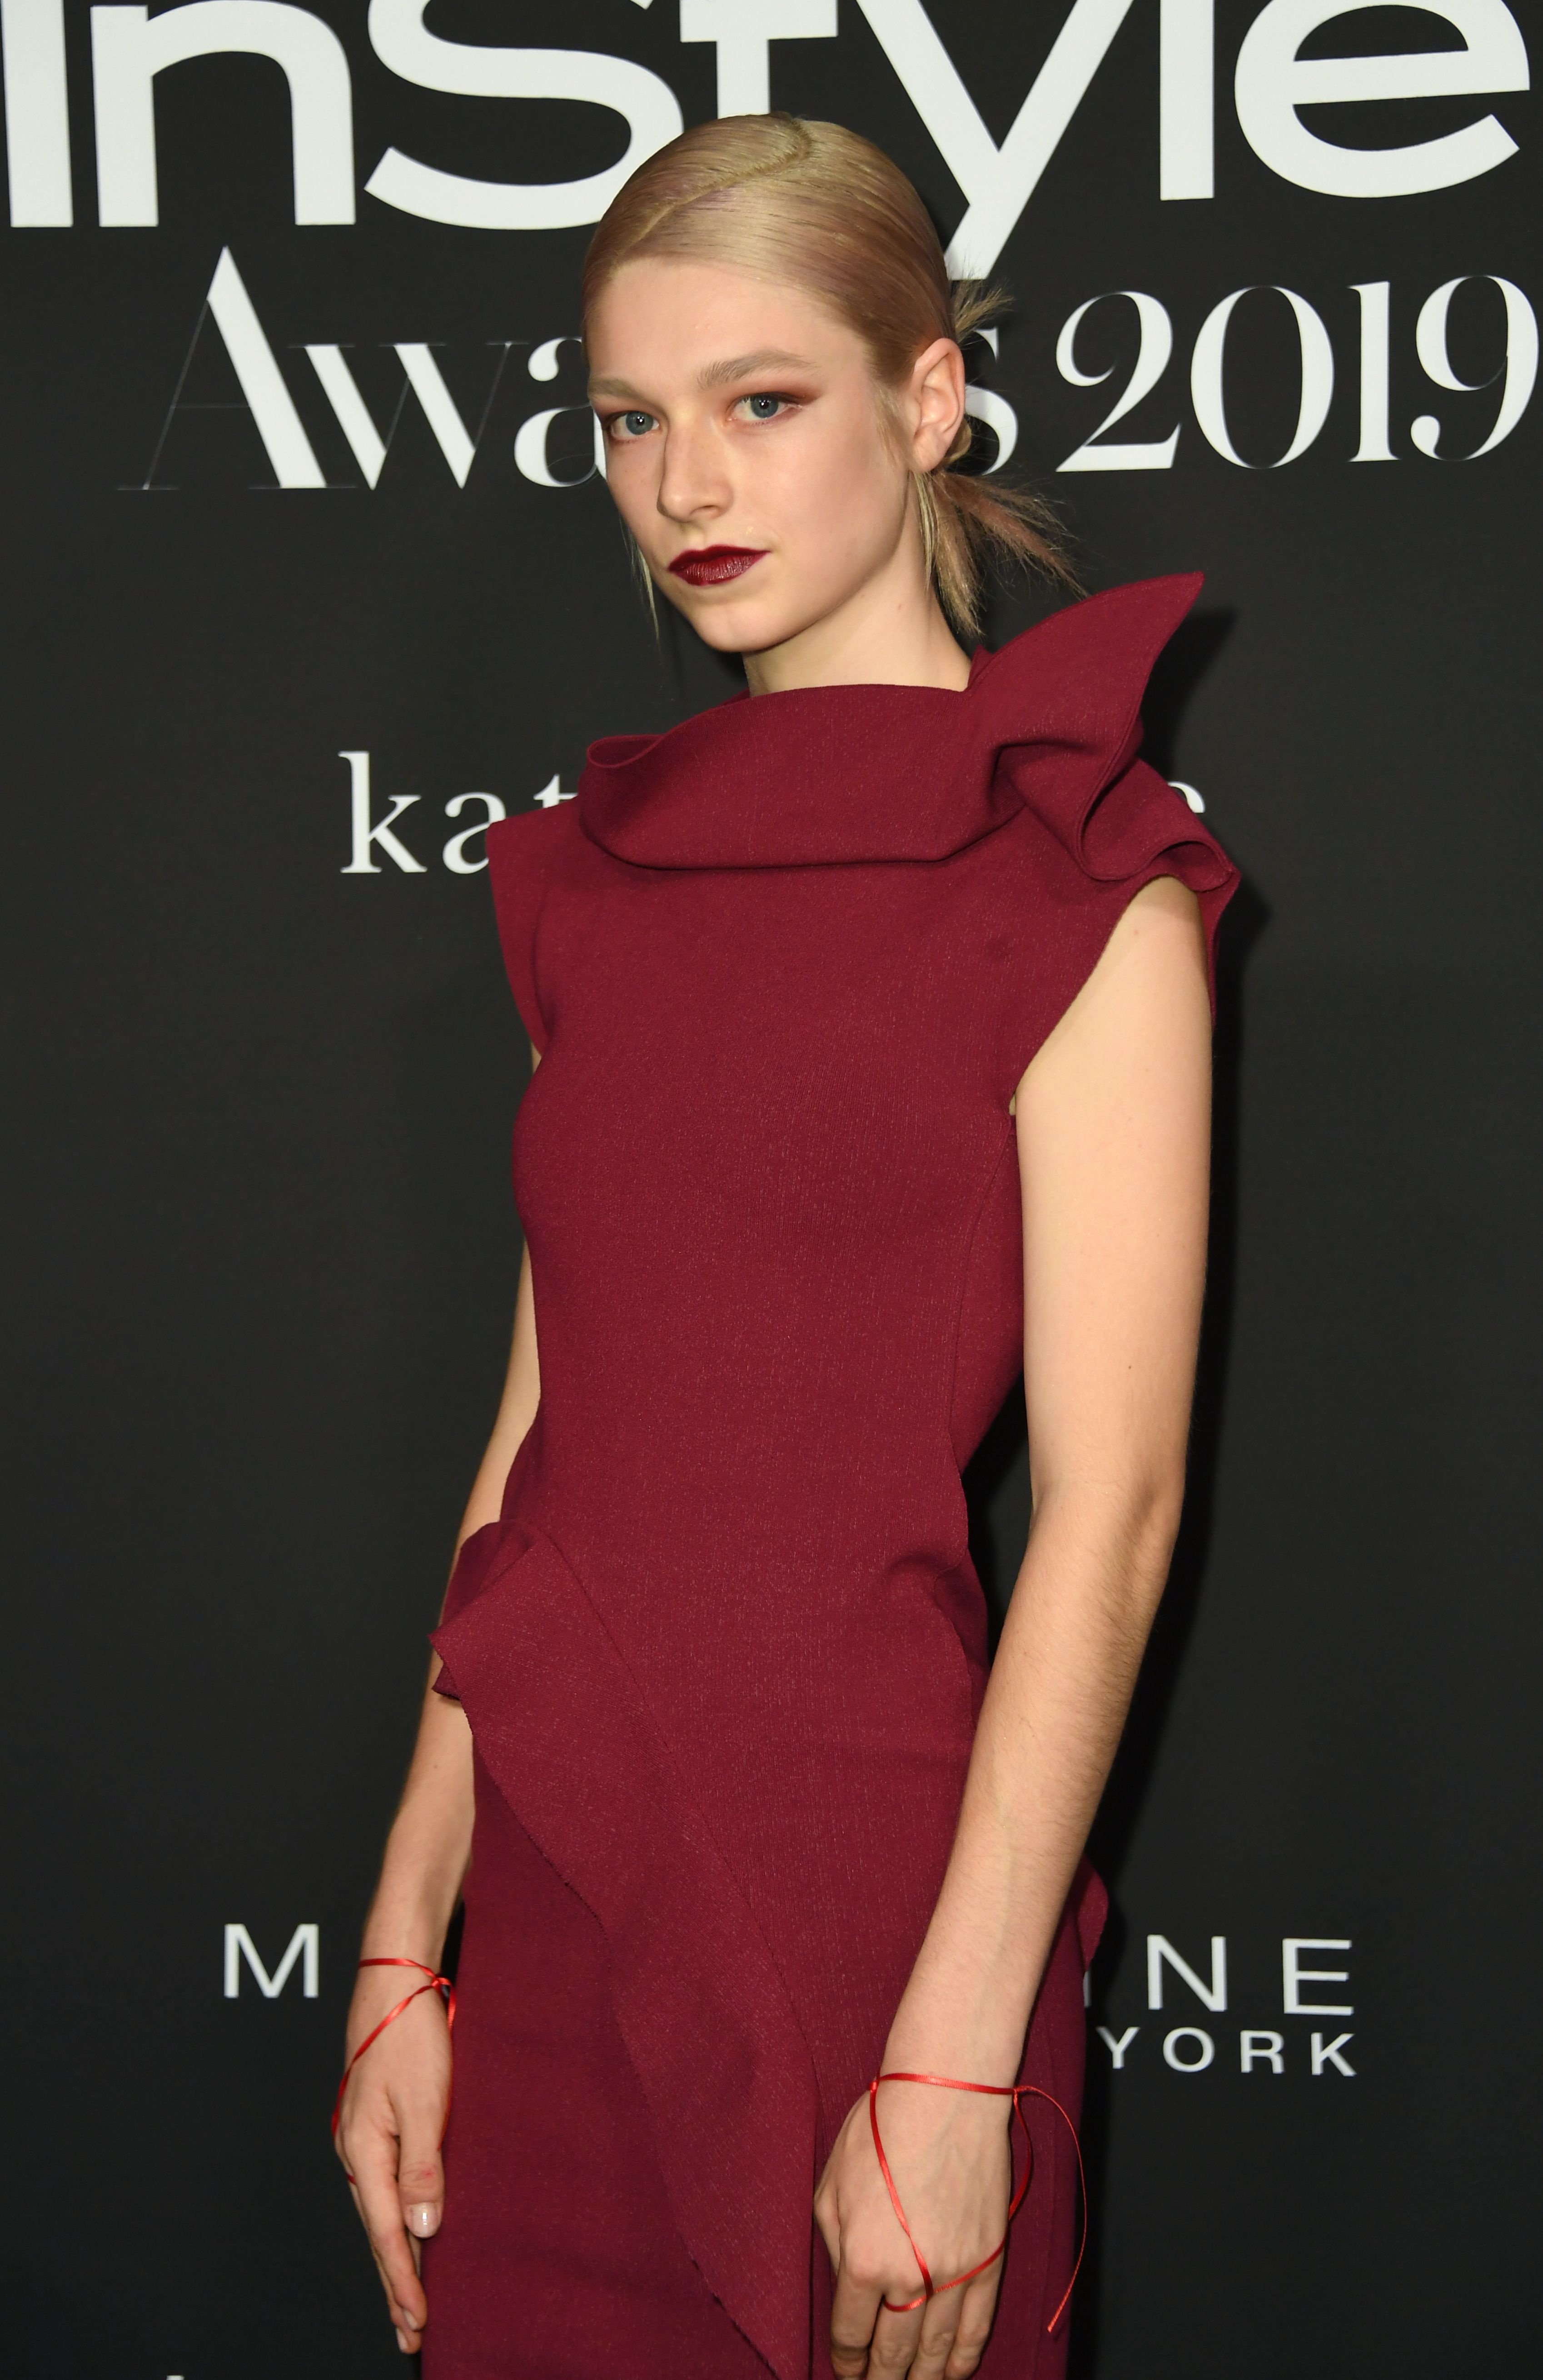 Hunter Schafer attends 5th Annual "InStyle Awards" on October 21, 2019 | Source: Getty Images